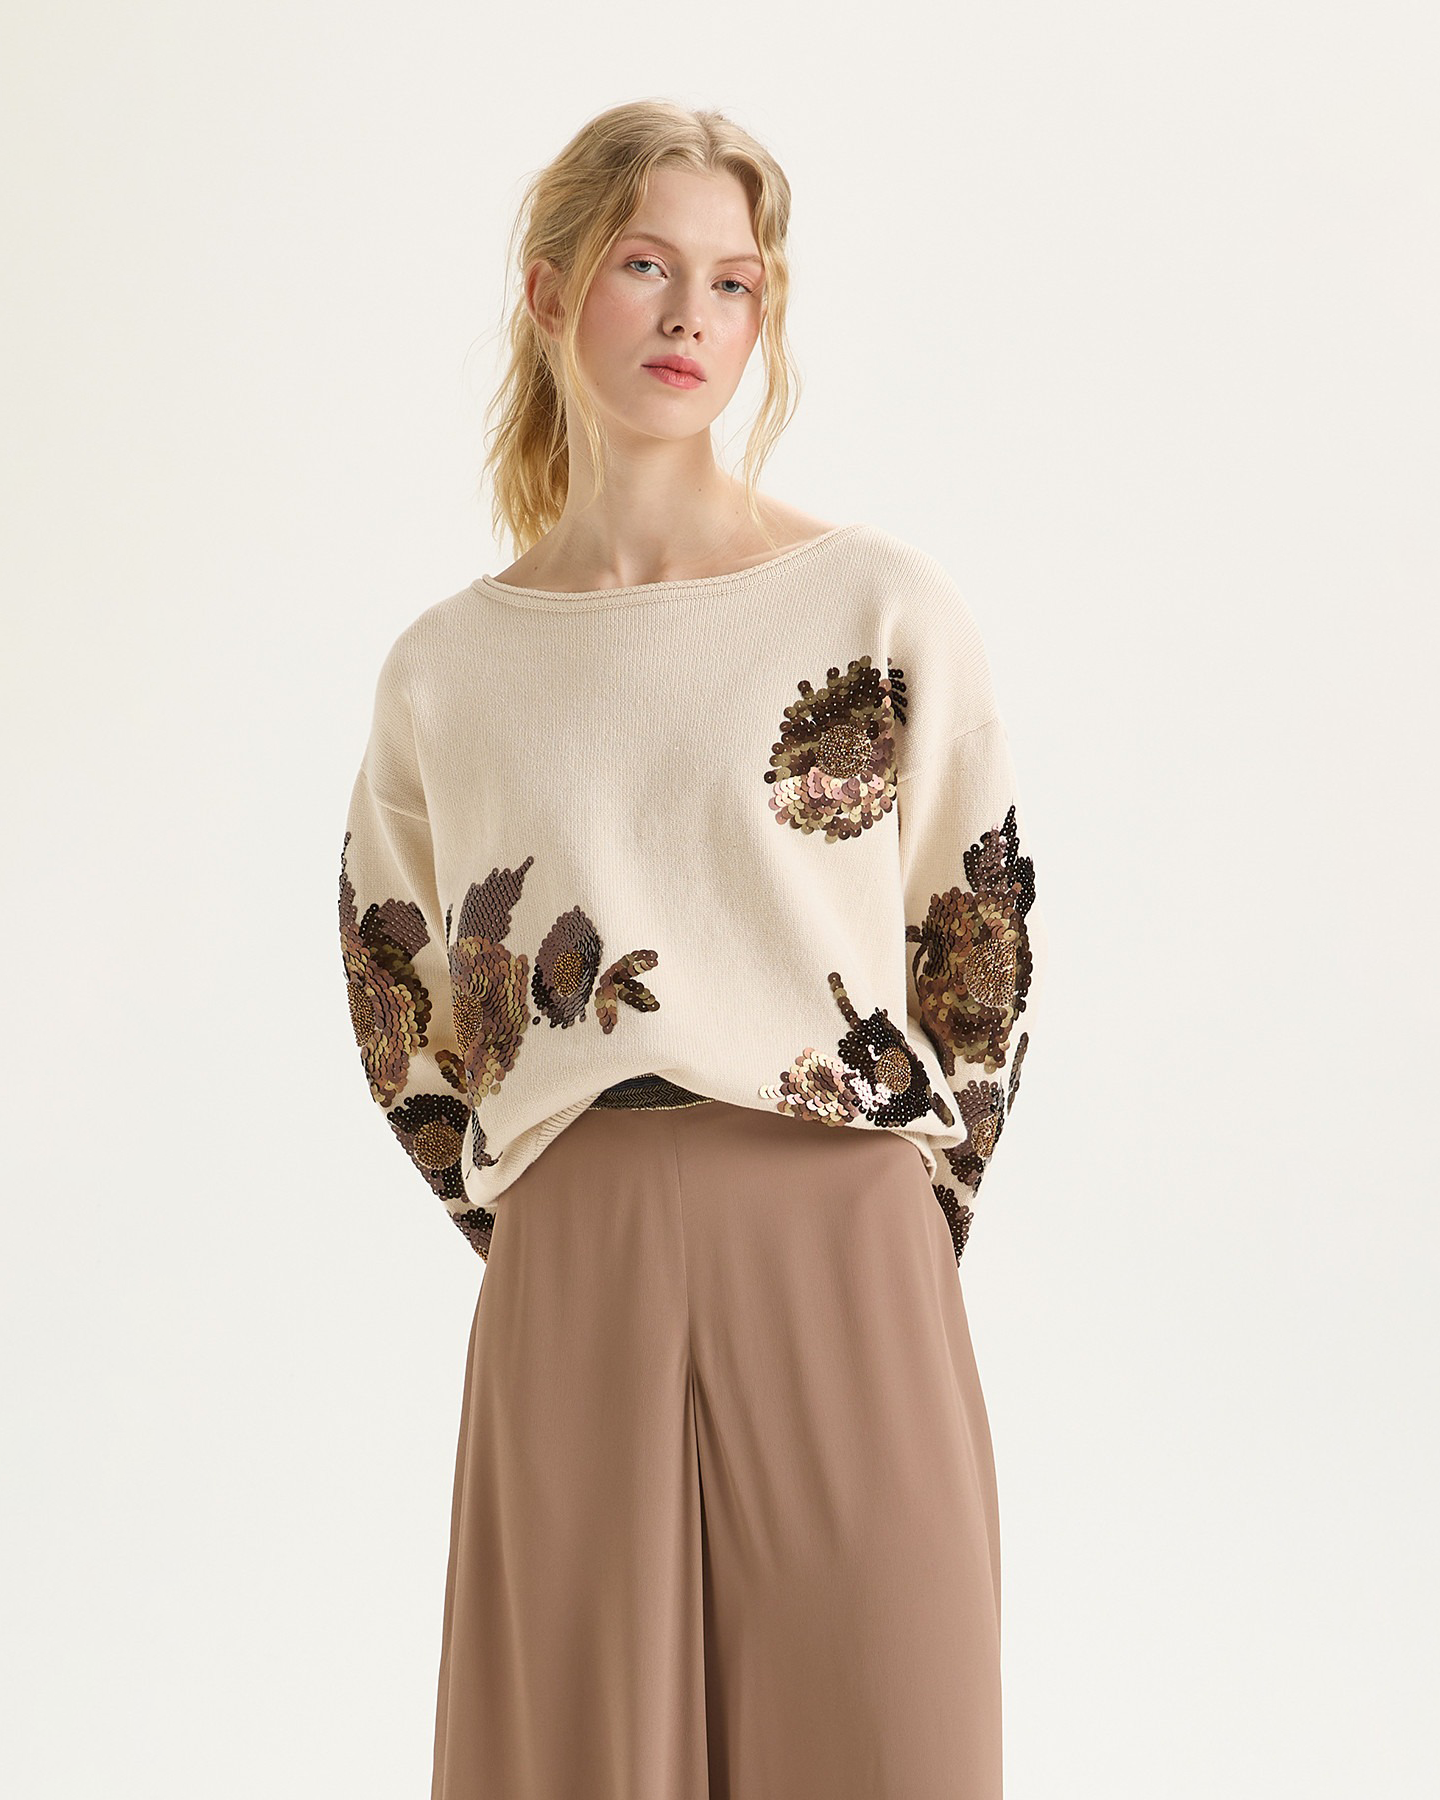 FLOWERS EMBROIDERY SWEATER - NATURAL